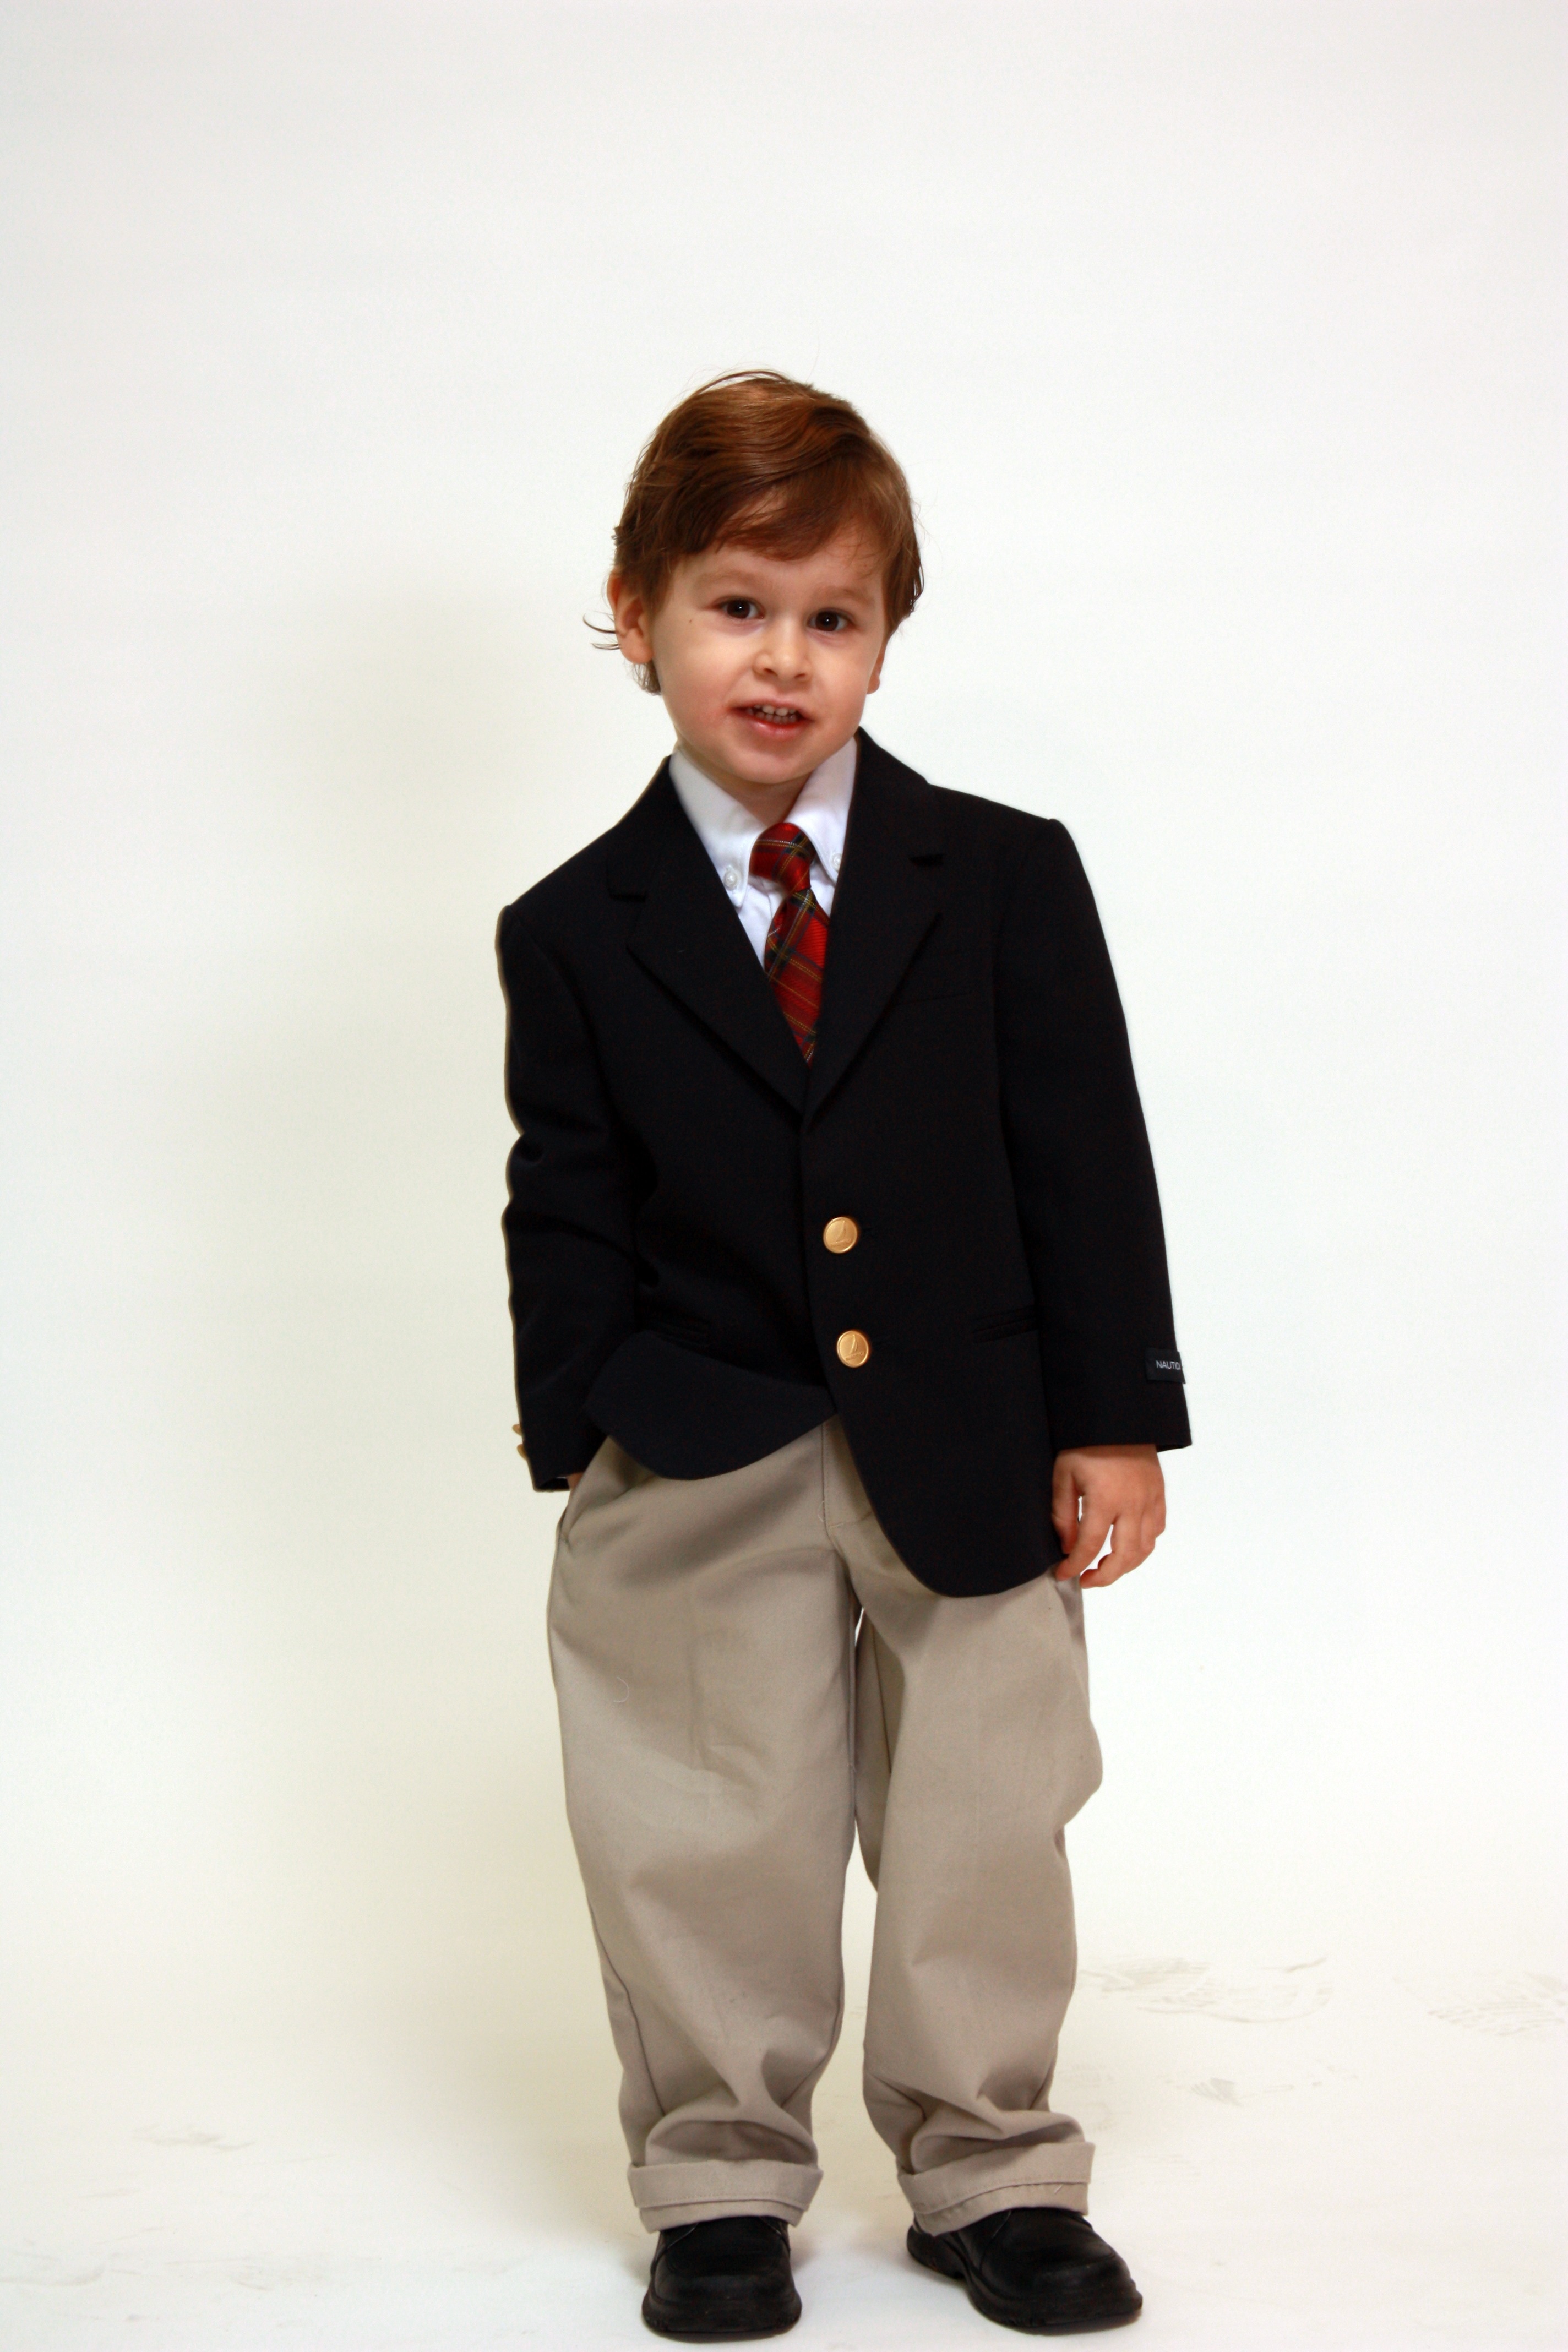 Boy In Black Suit - Young Boy In Suit , HD Wallpaper & Backgrounds